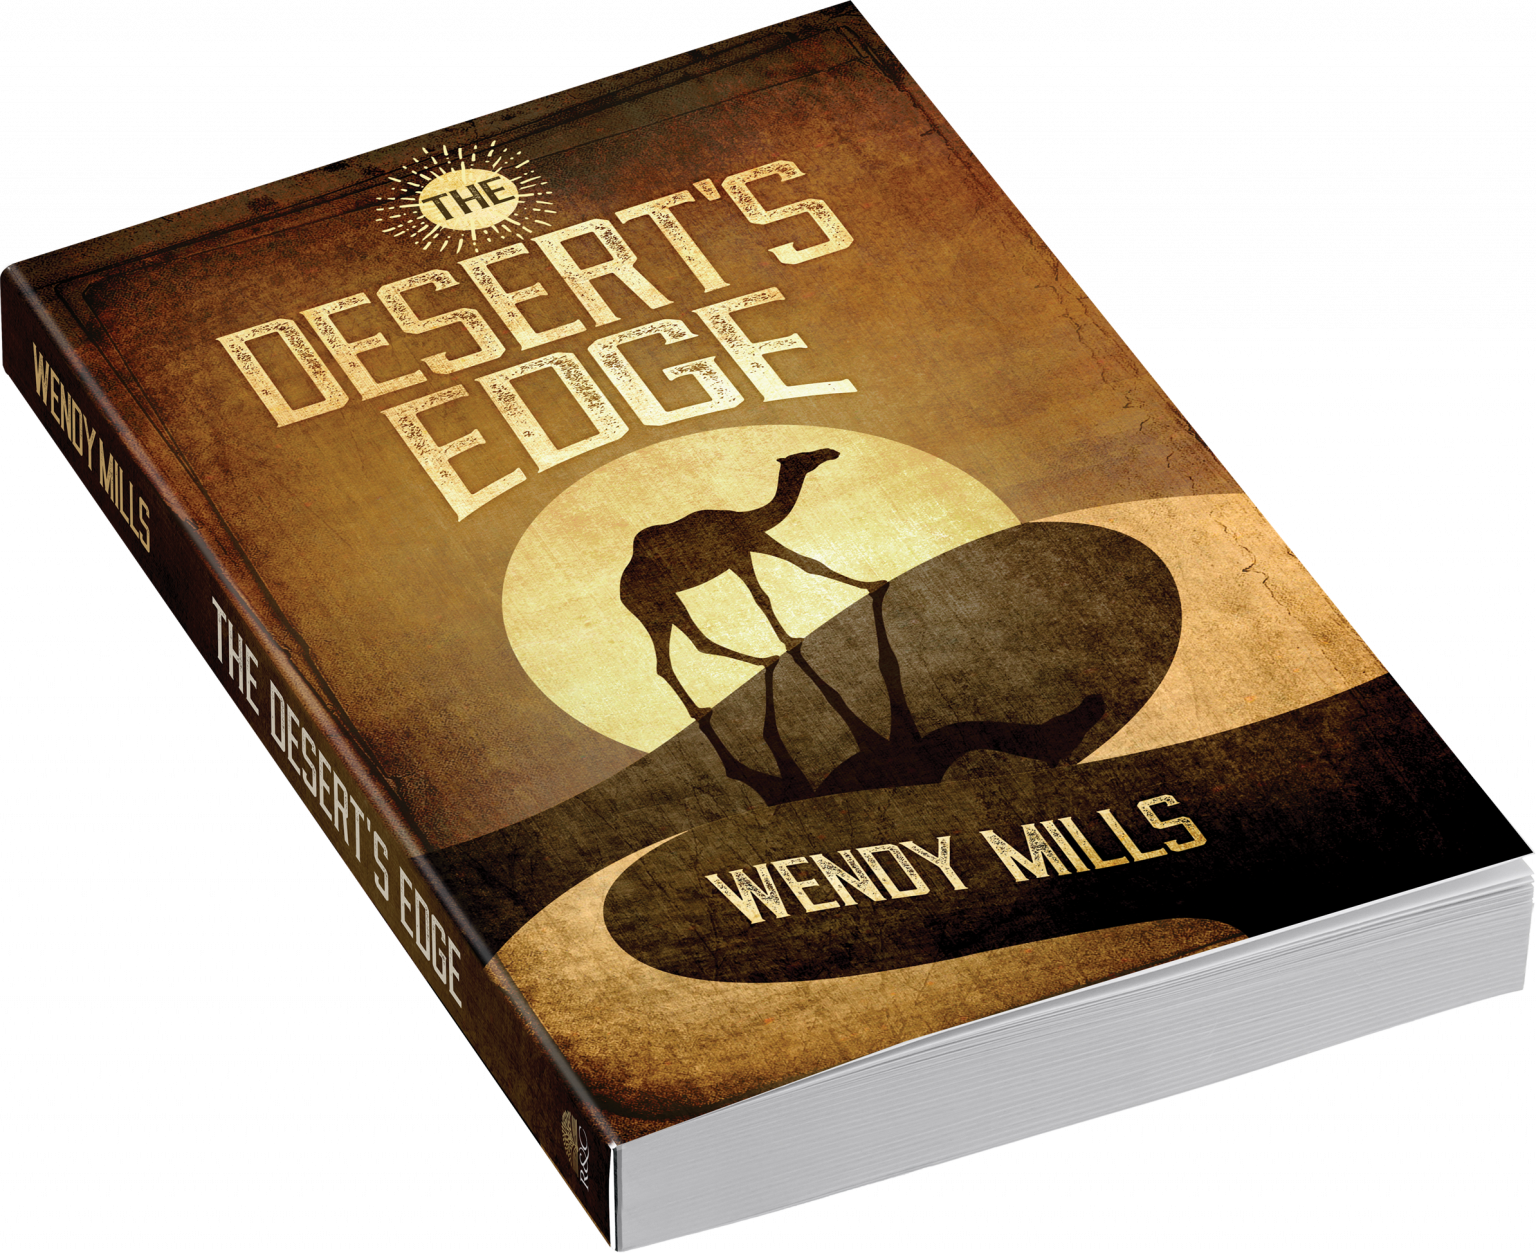 The Desert's Edge by Author Wendy Mills